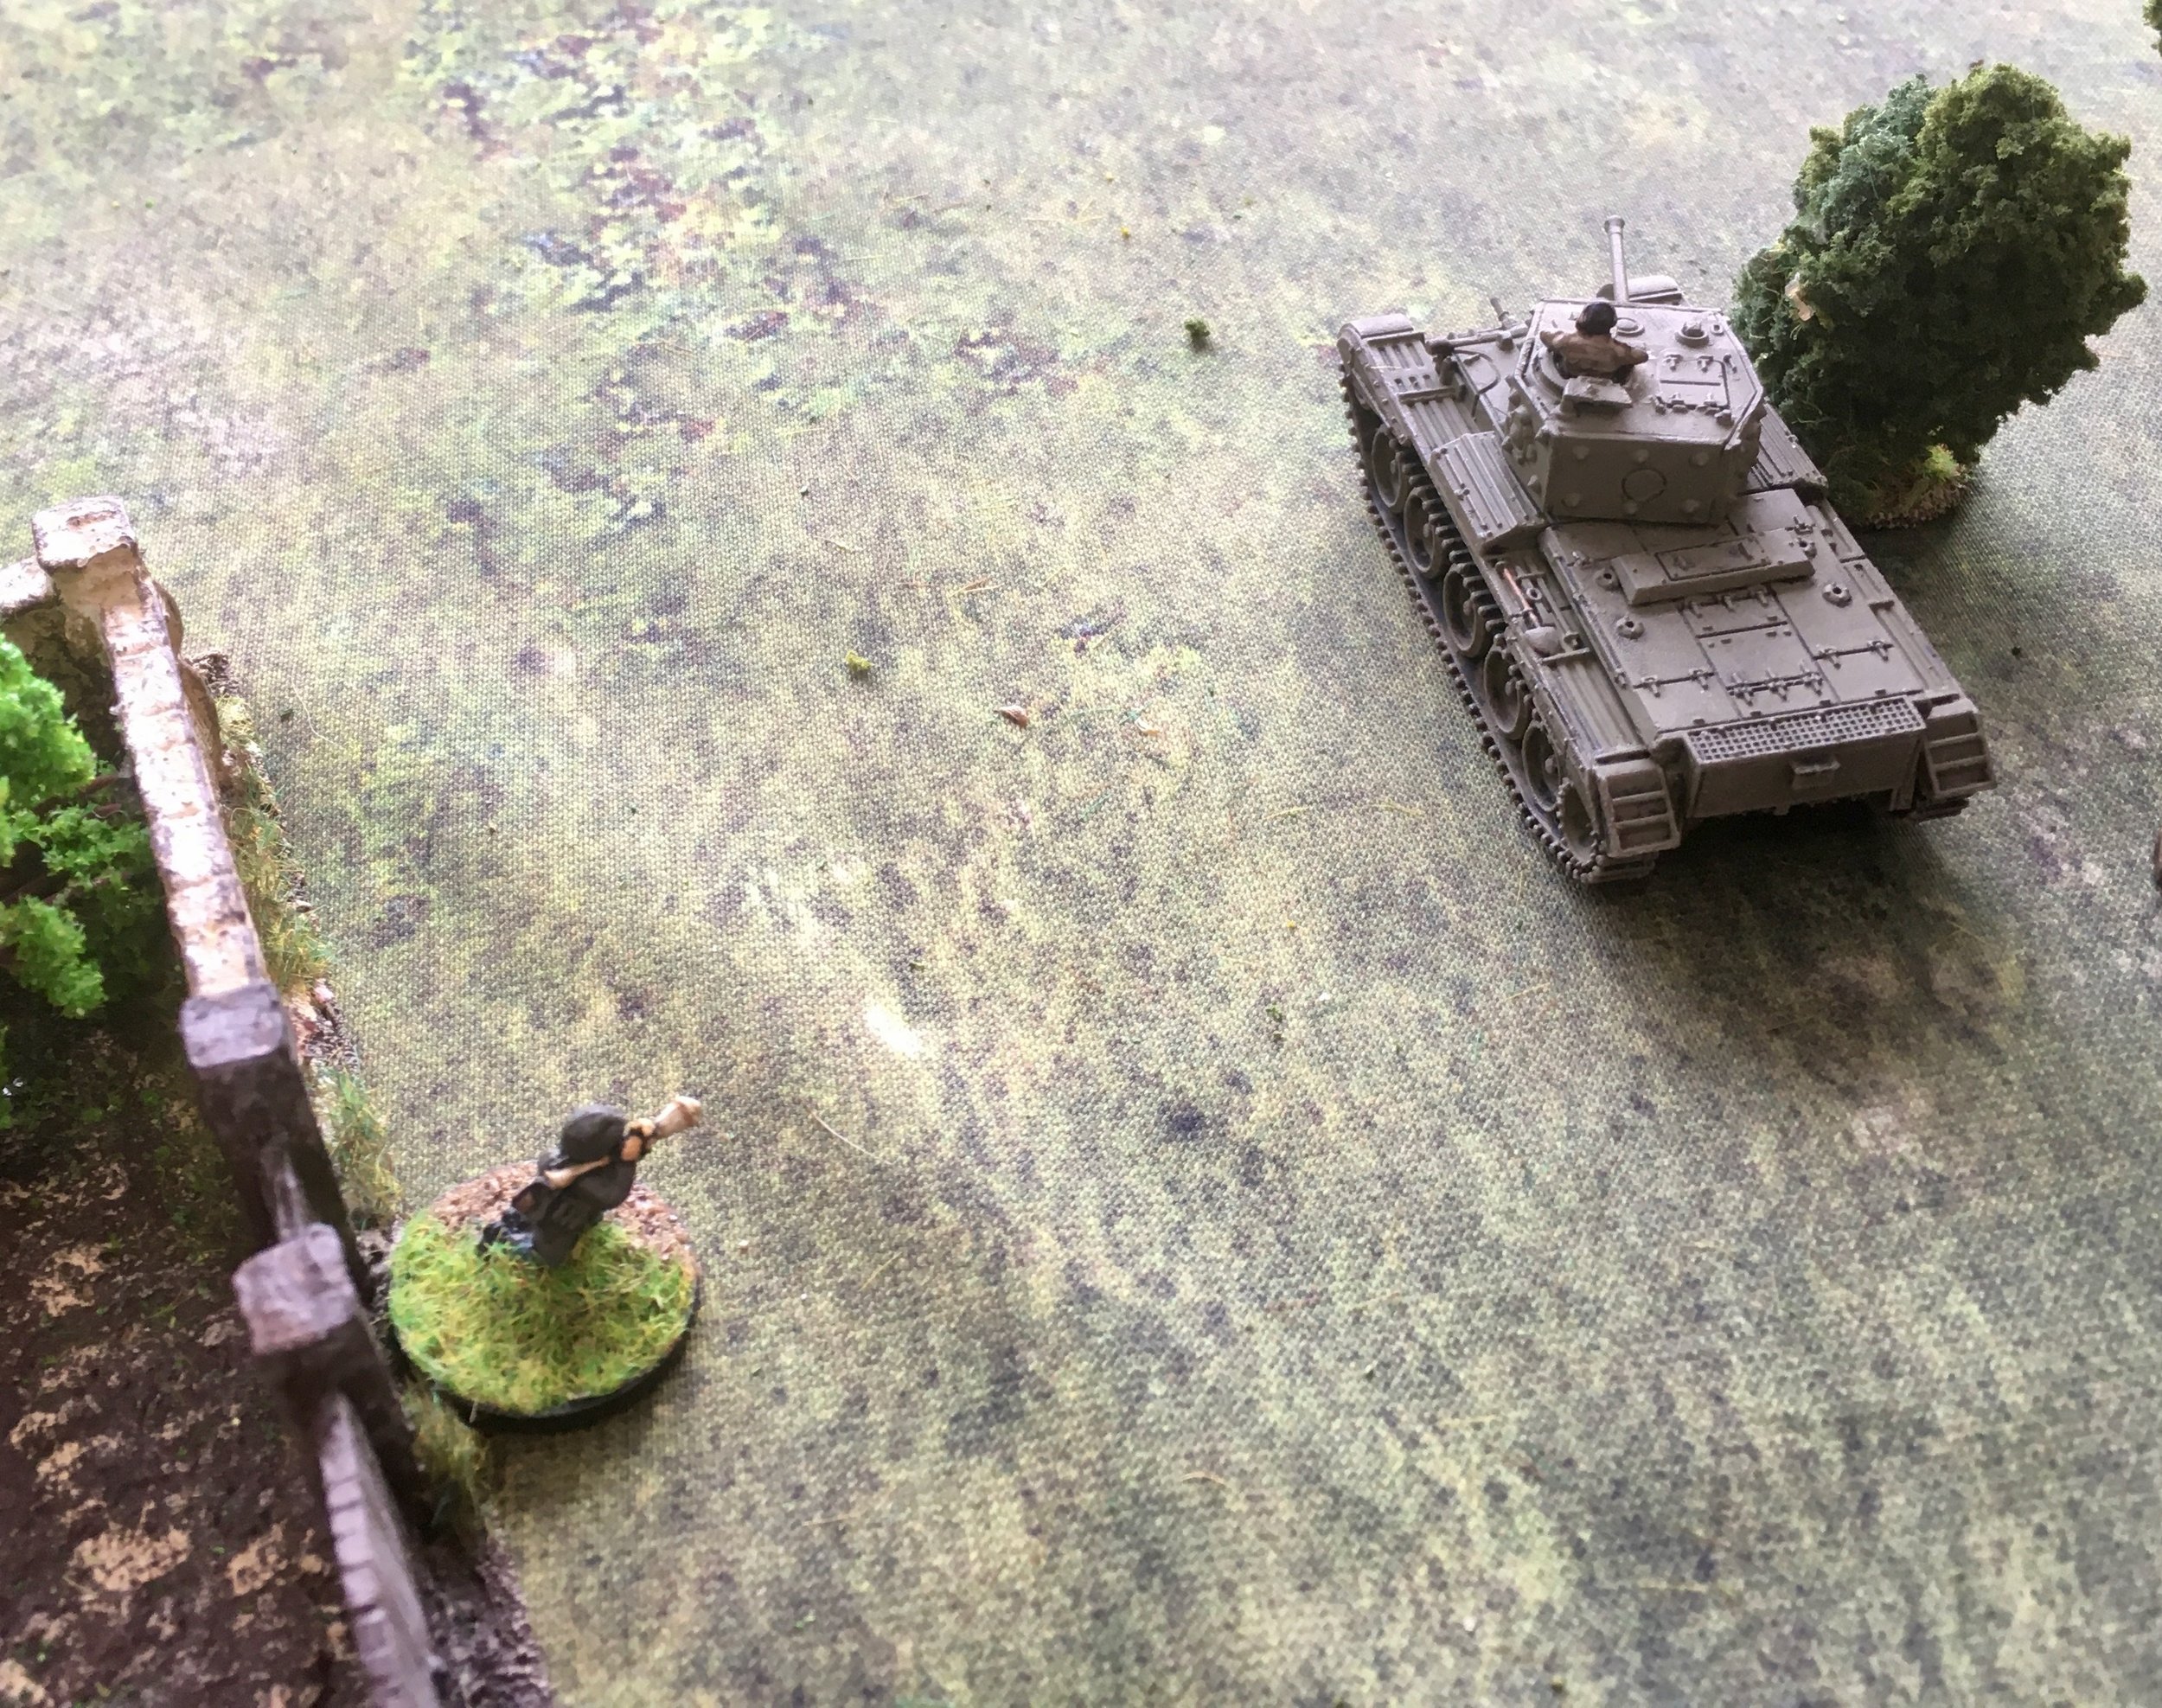 Rushing their panzerfaust forward to stop a Cromwell which had a clear run to the bridge which would secure victory!